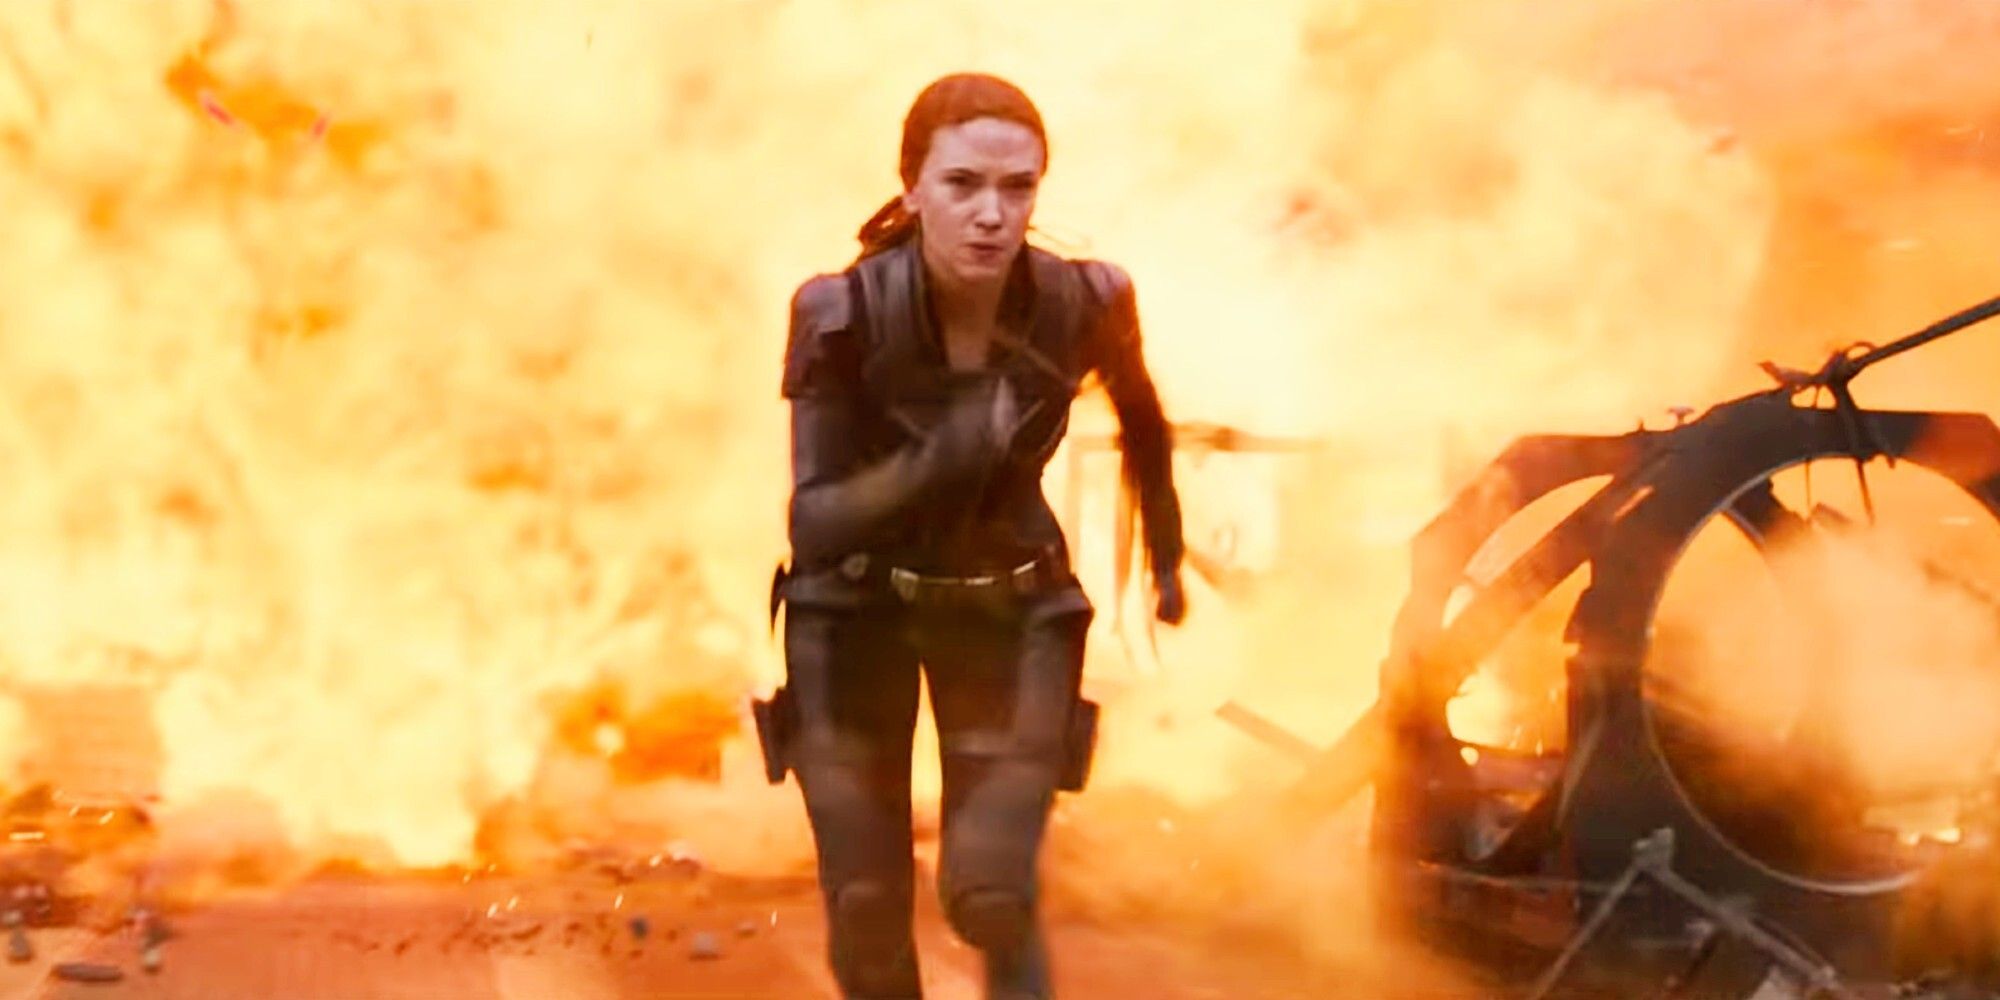 Natasha runs from an explosion in the upcoming in Black Widow Movie